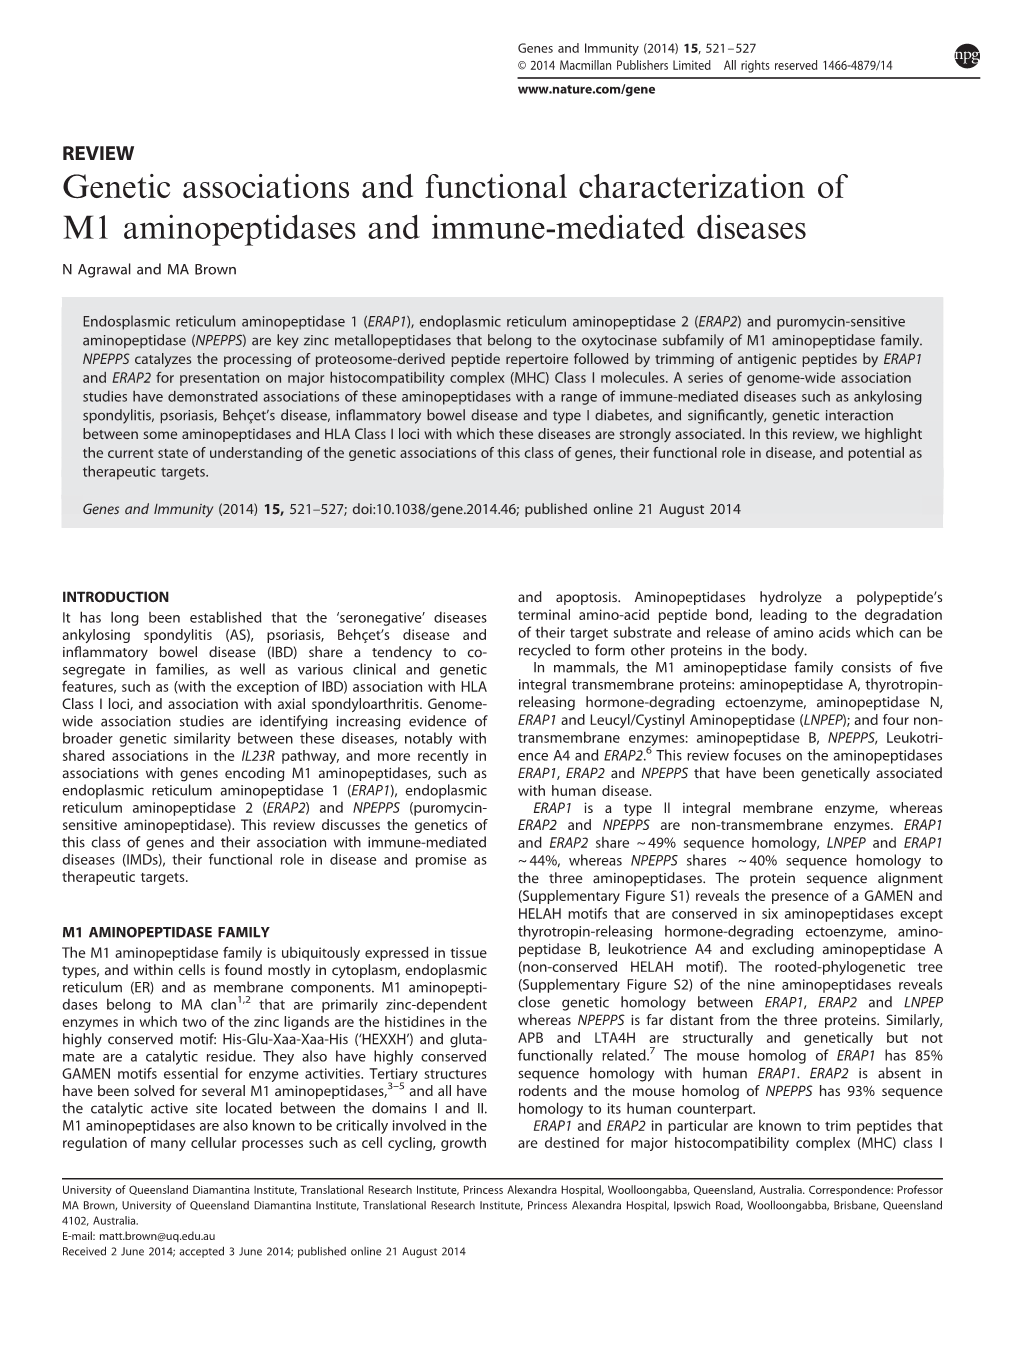 Genetic Associations and Functional Characterization of M1 Aminopeptidases and Immune-Mediated Diseases